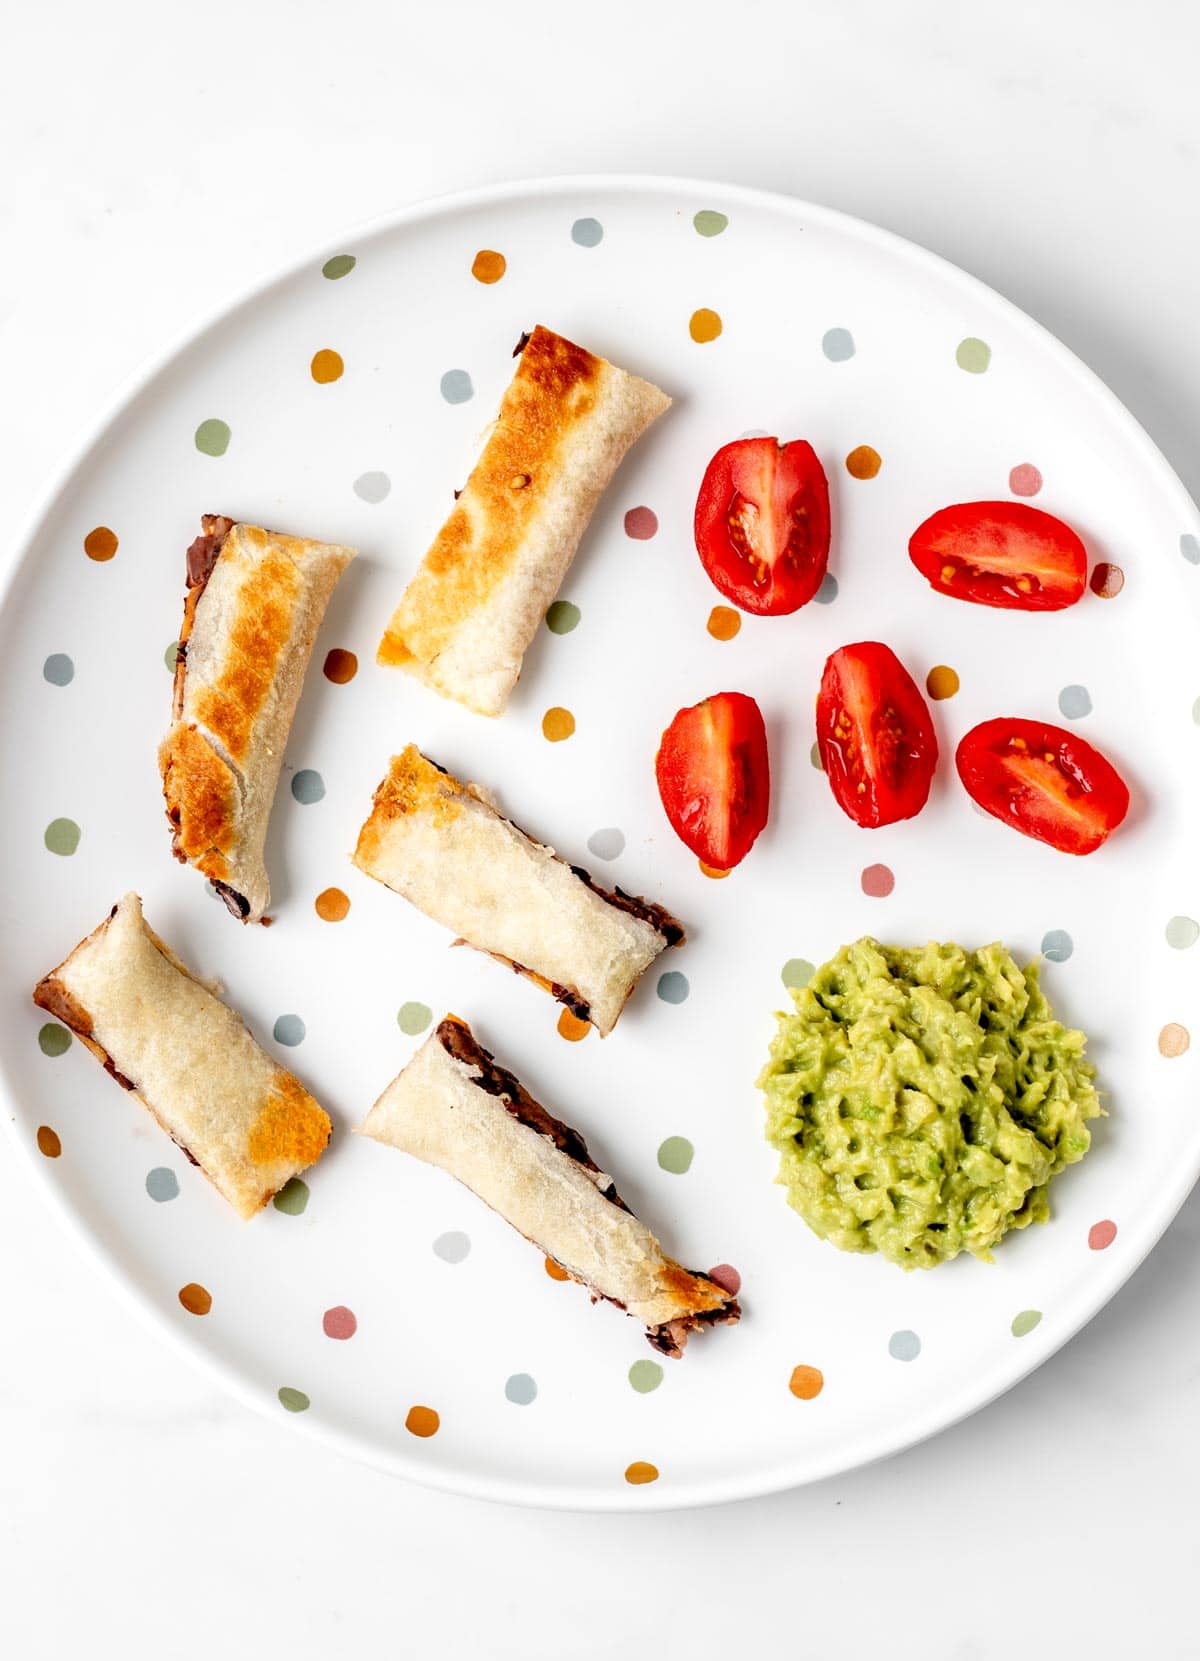 Pieces of a baby led weaning quesadilla, guacamole and tomatoes on a polka dot plate.